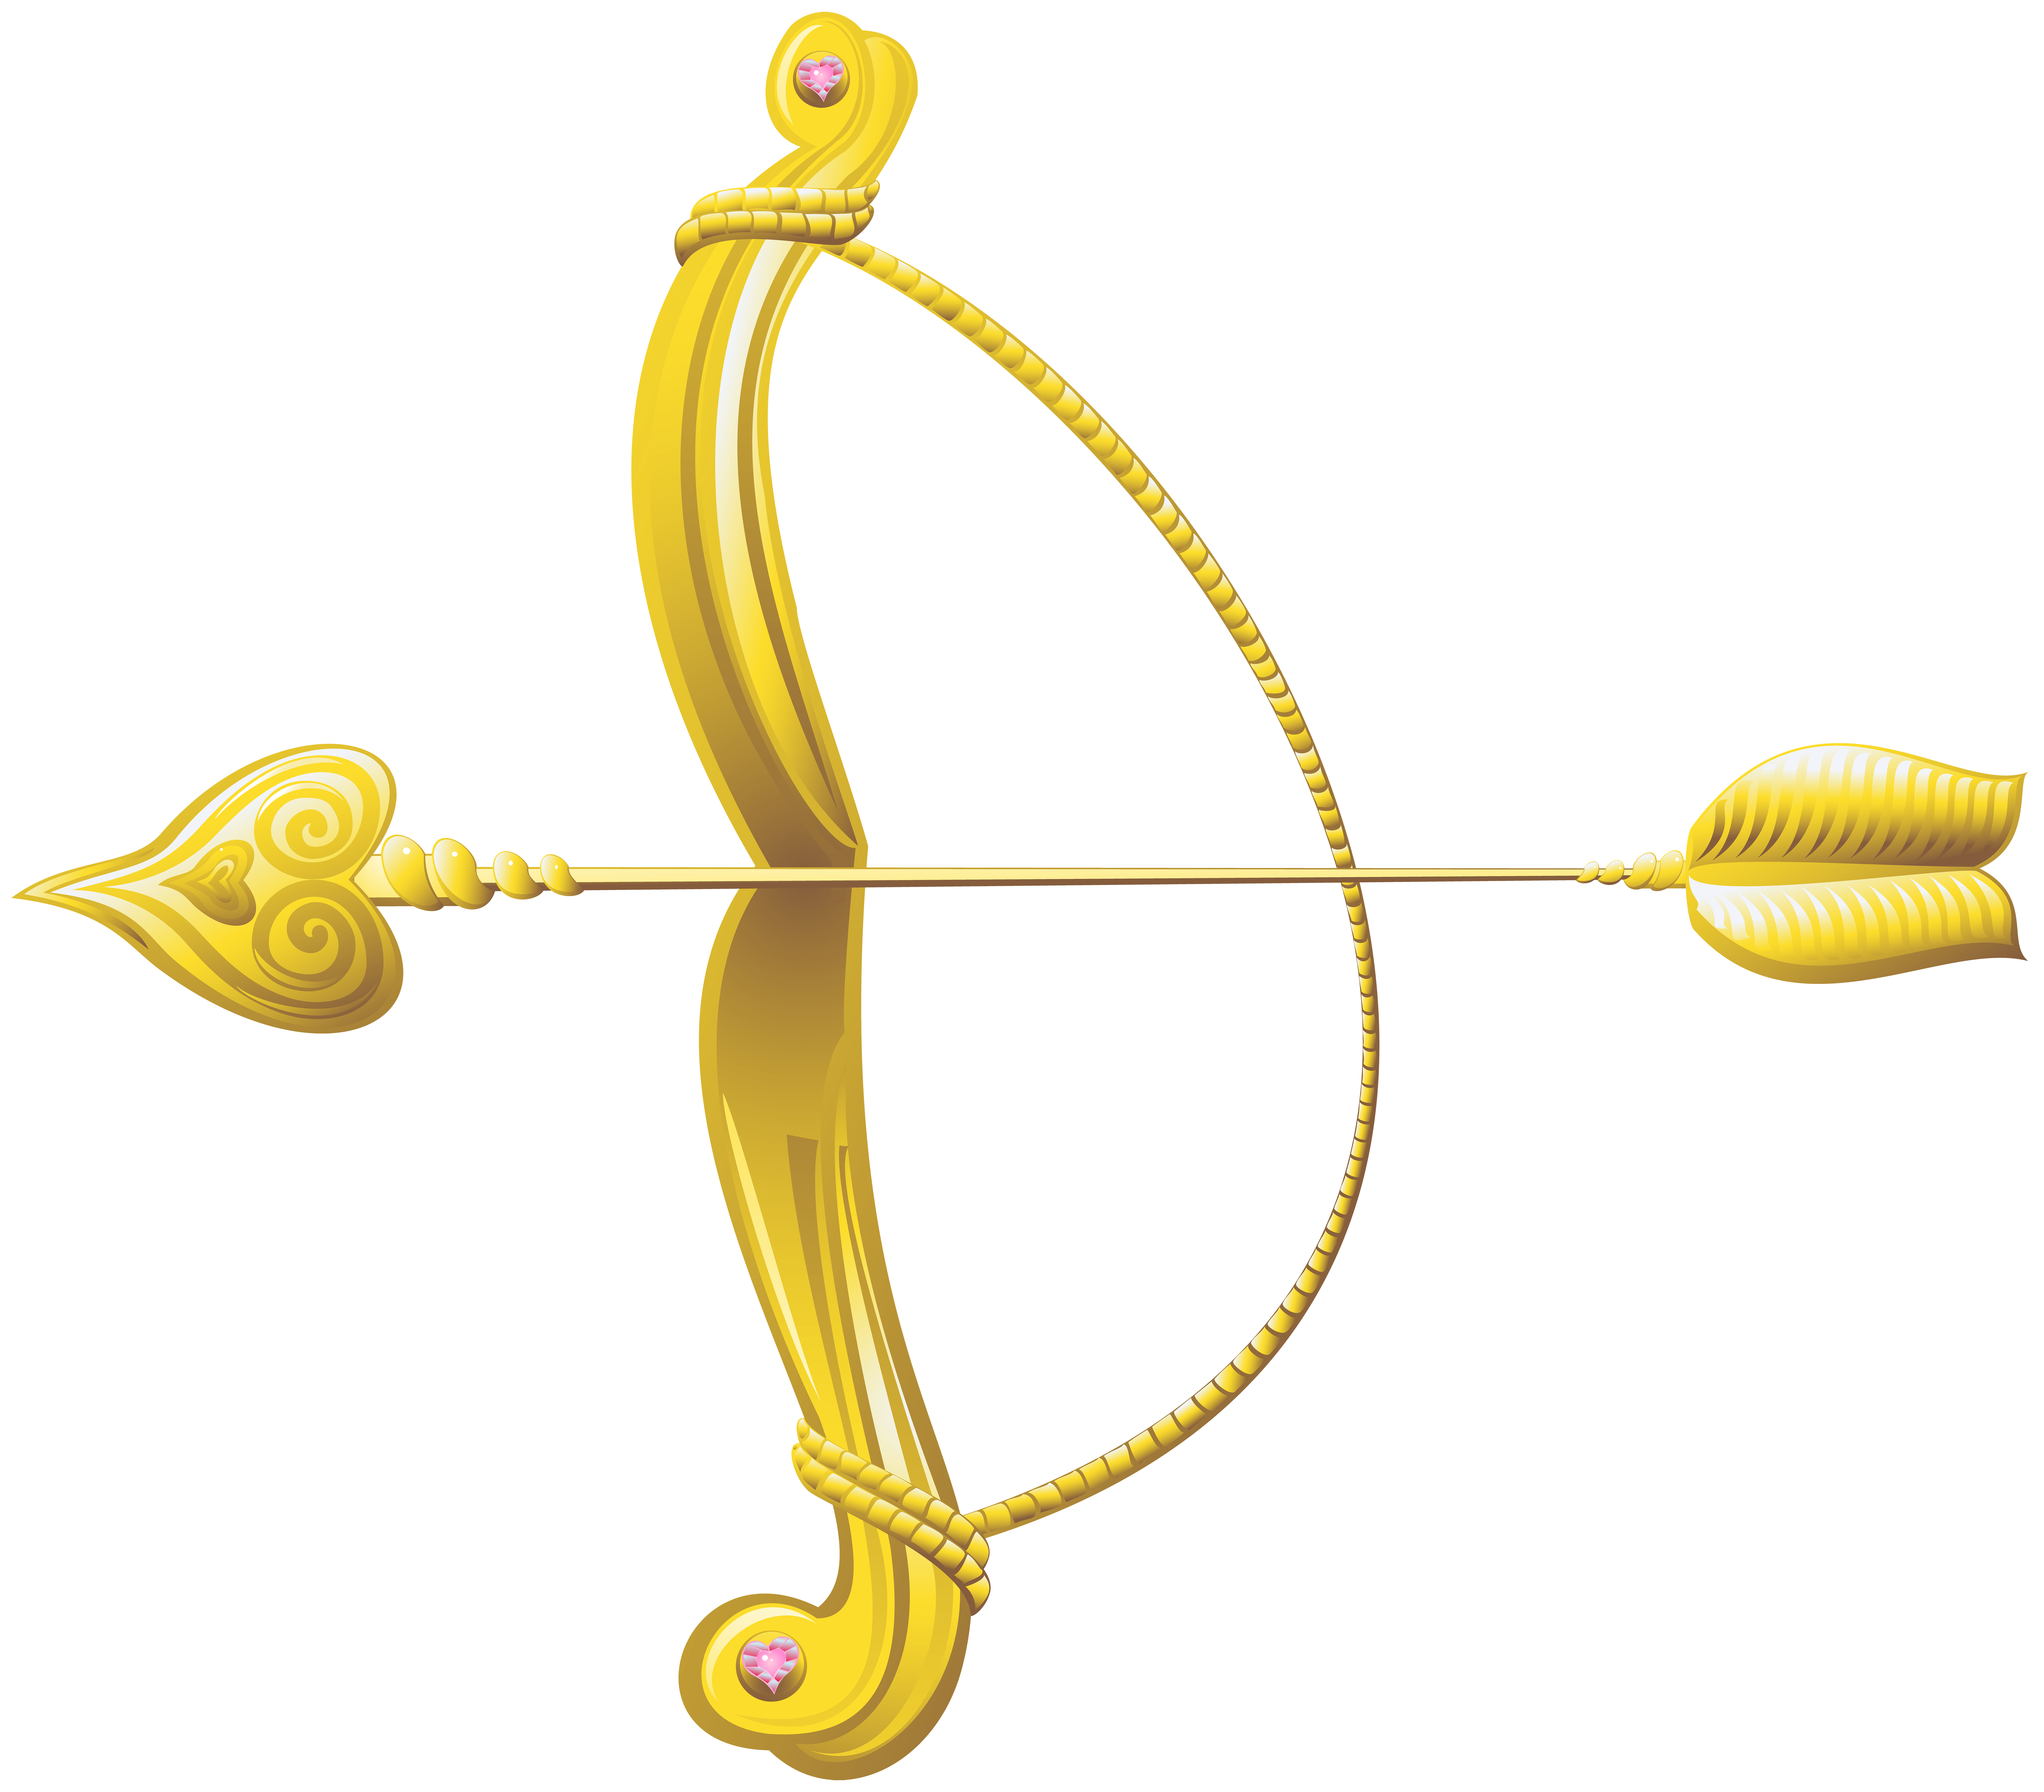 Gold Bow Transparent Clip Art​  Gallery Yopriceville - High-Quality Free  Images and Transparent PNG Clipart